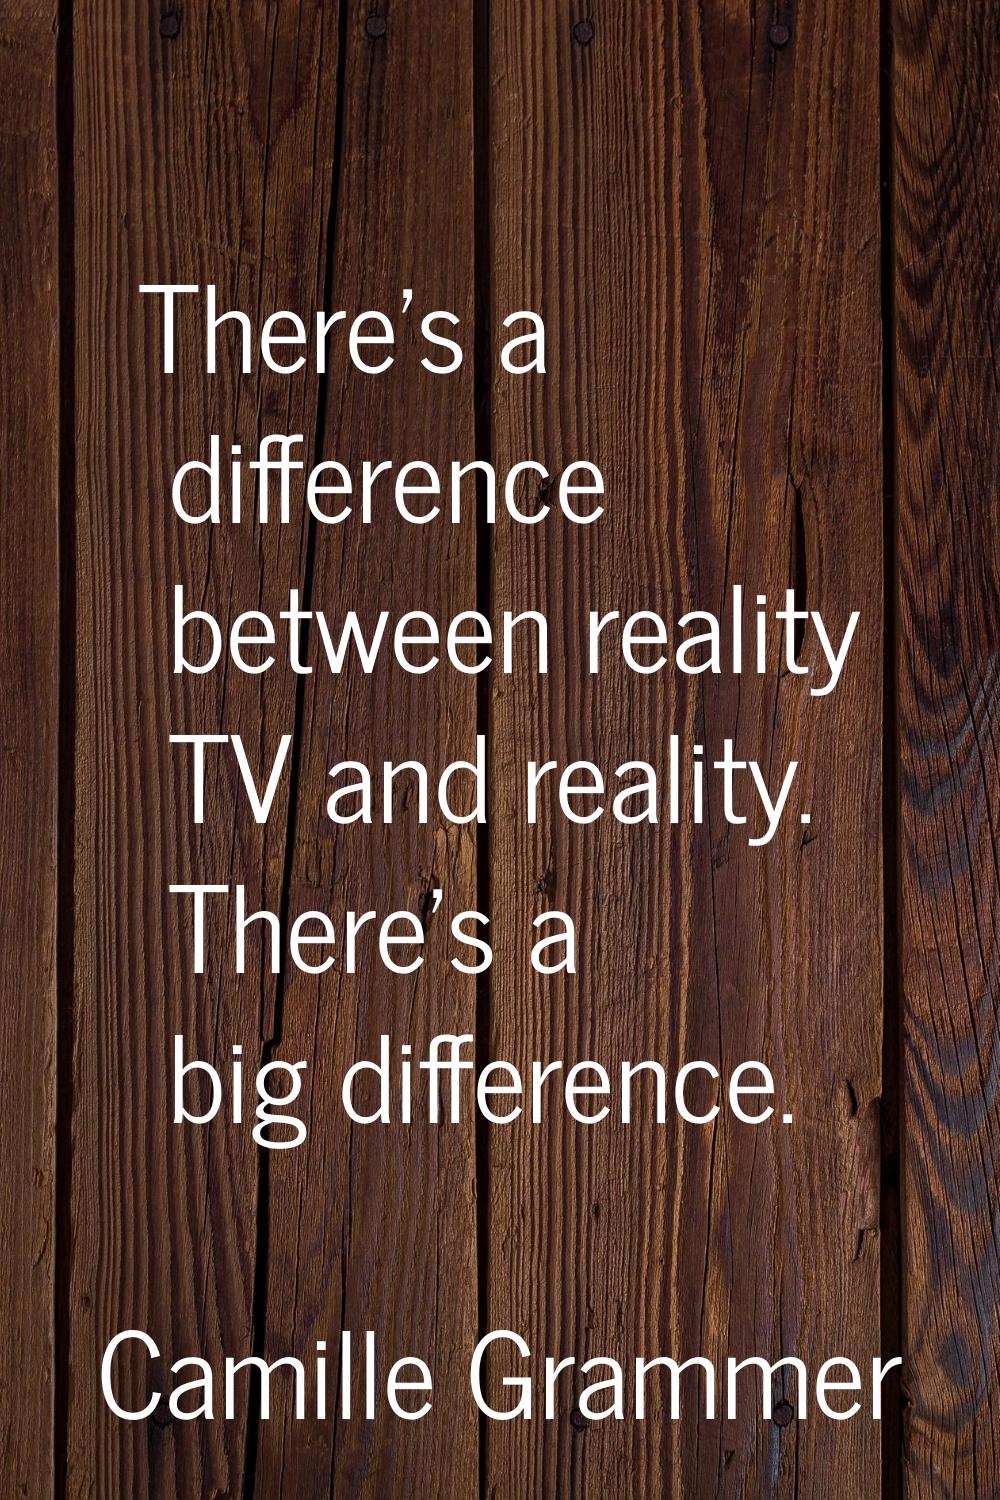 There's a difference between reality TV and reality. There's a big difference.